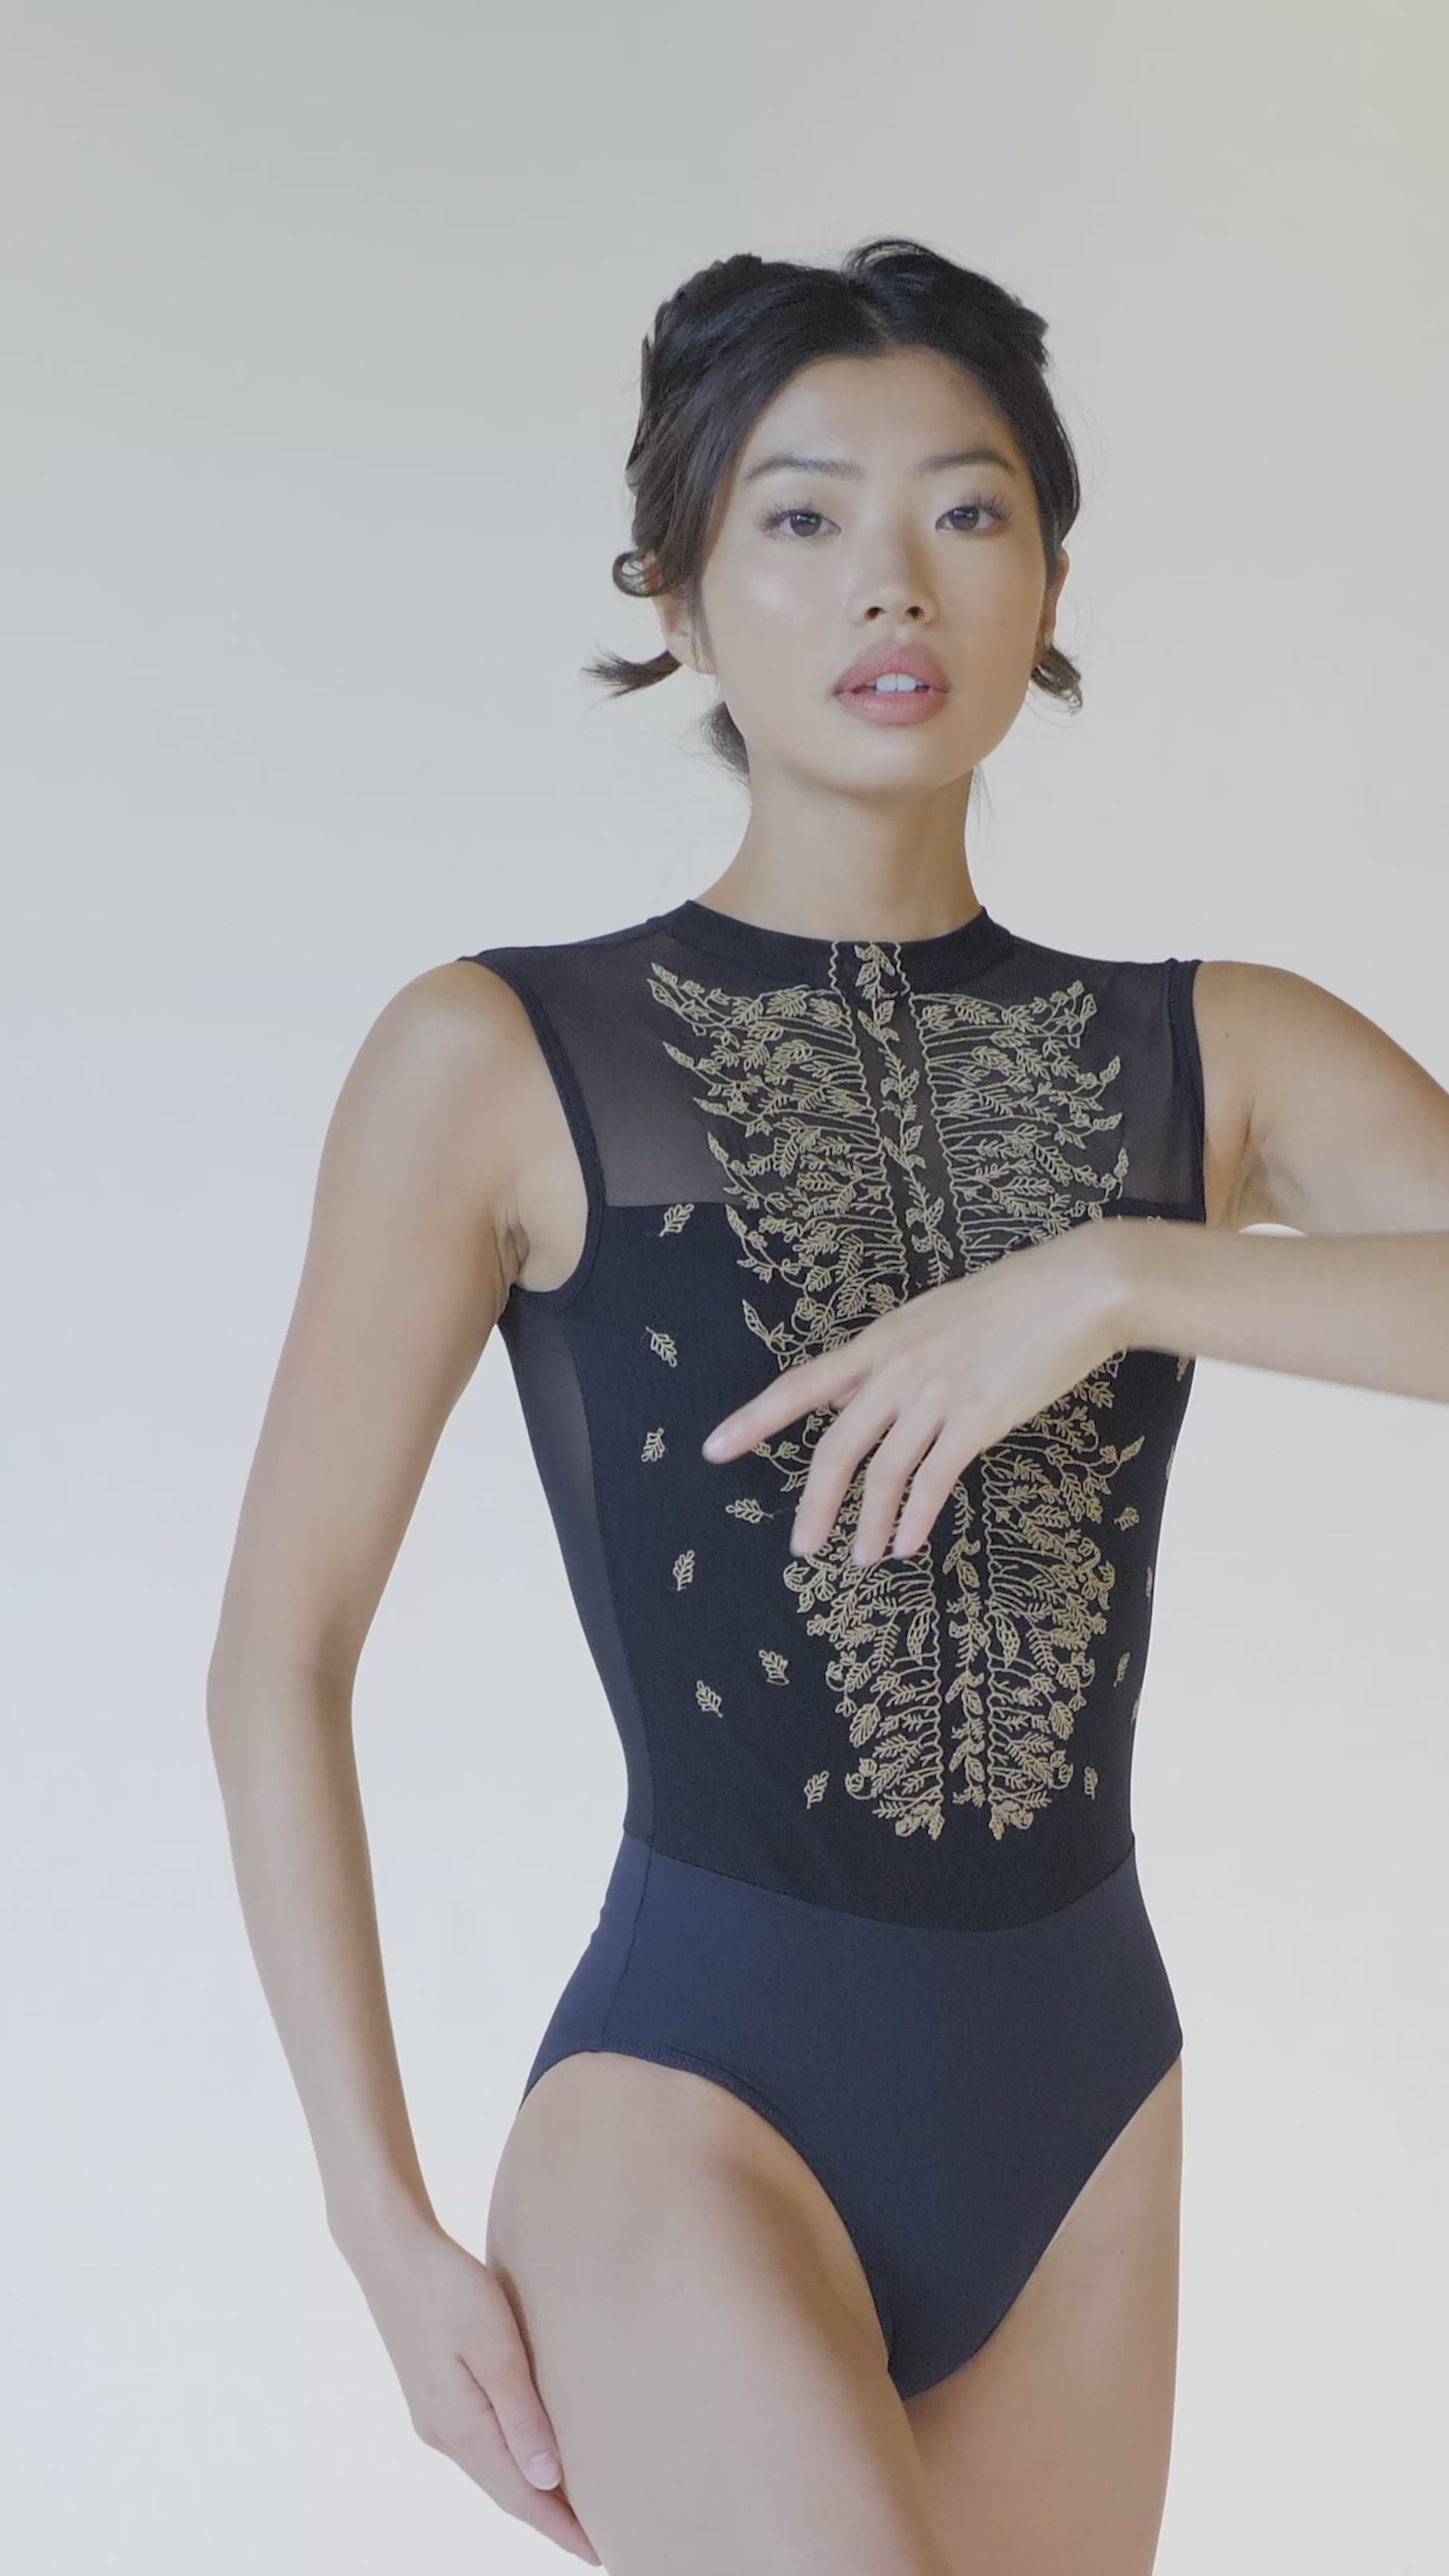 Ballet Rosa Harper leotard in Black with Gold from The Collective dancewear